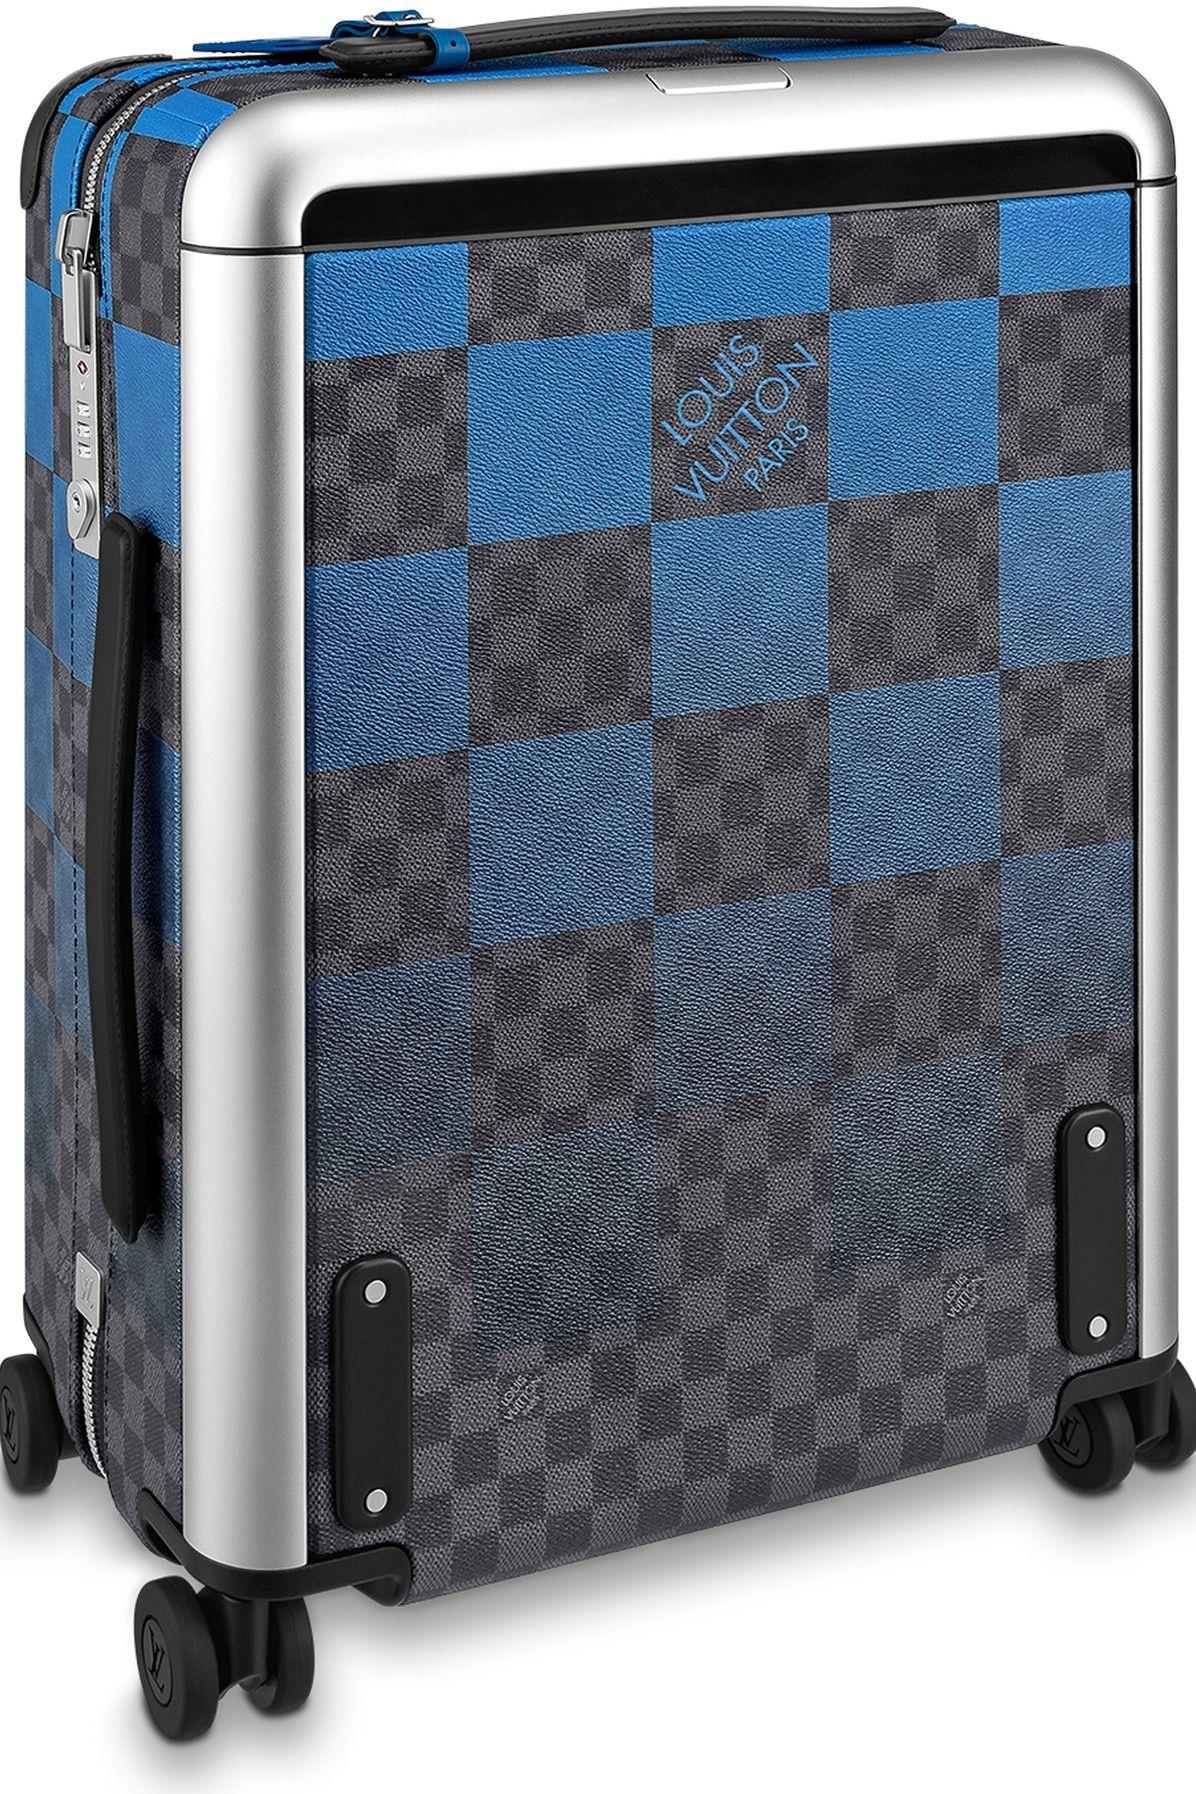 Louis Vuitton Blue Monogram Horizon 55 Luggage used by Lionel